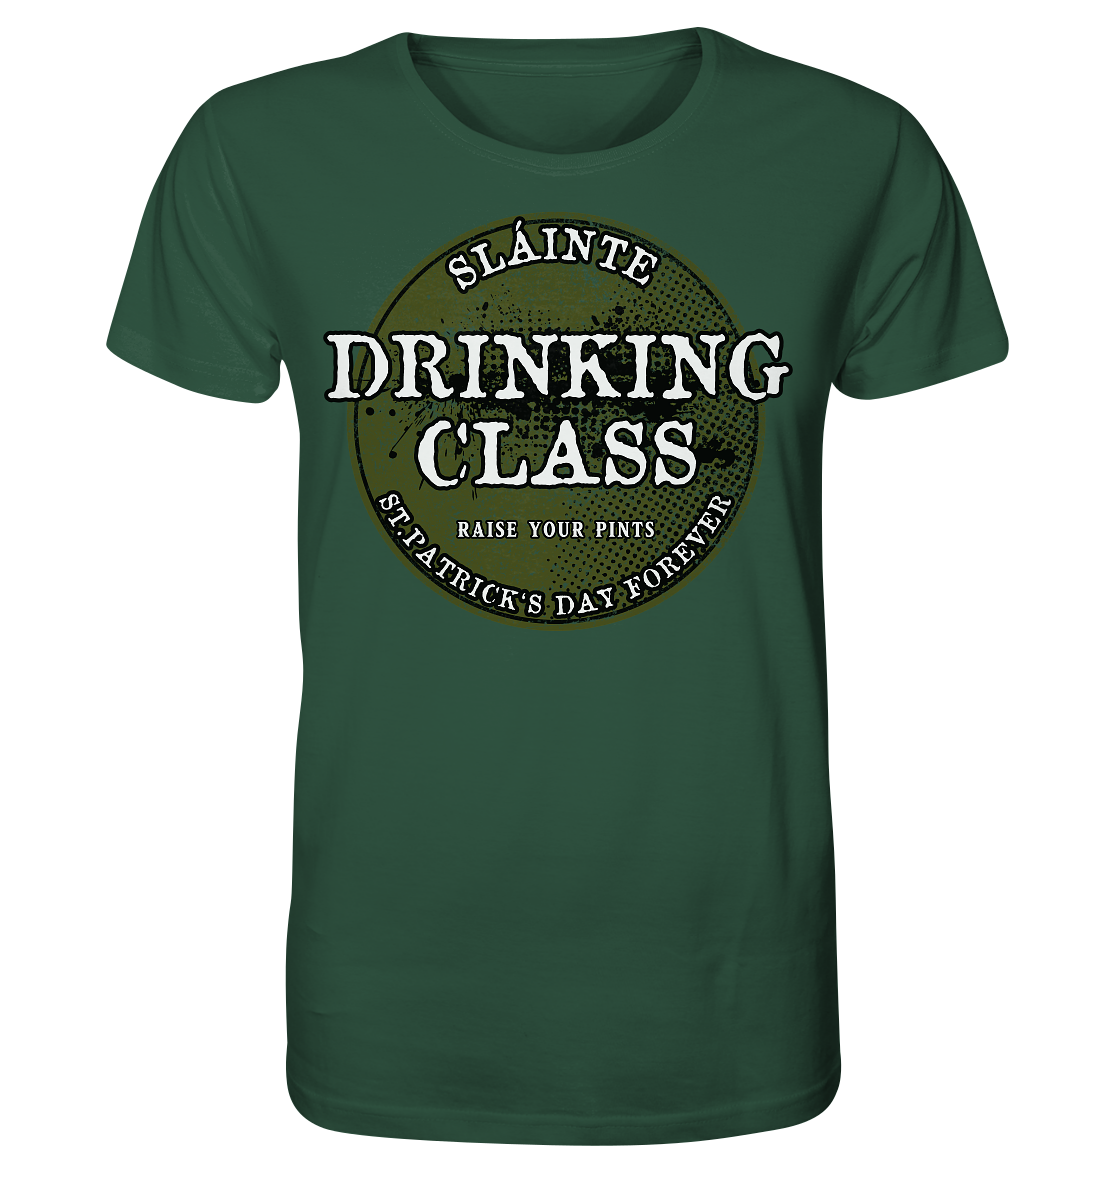 Drinking Class "St.Patrick's Day Forever" - Organic Shirt